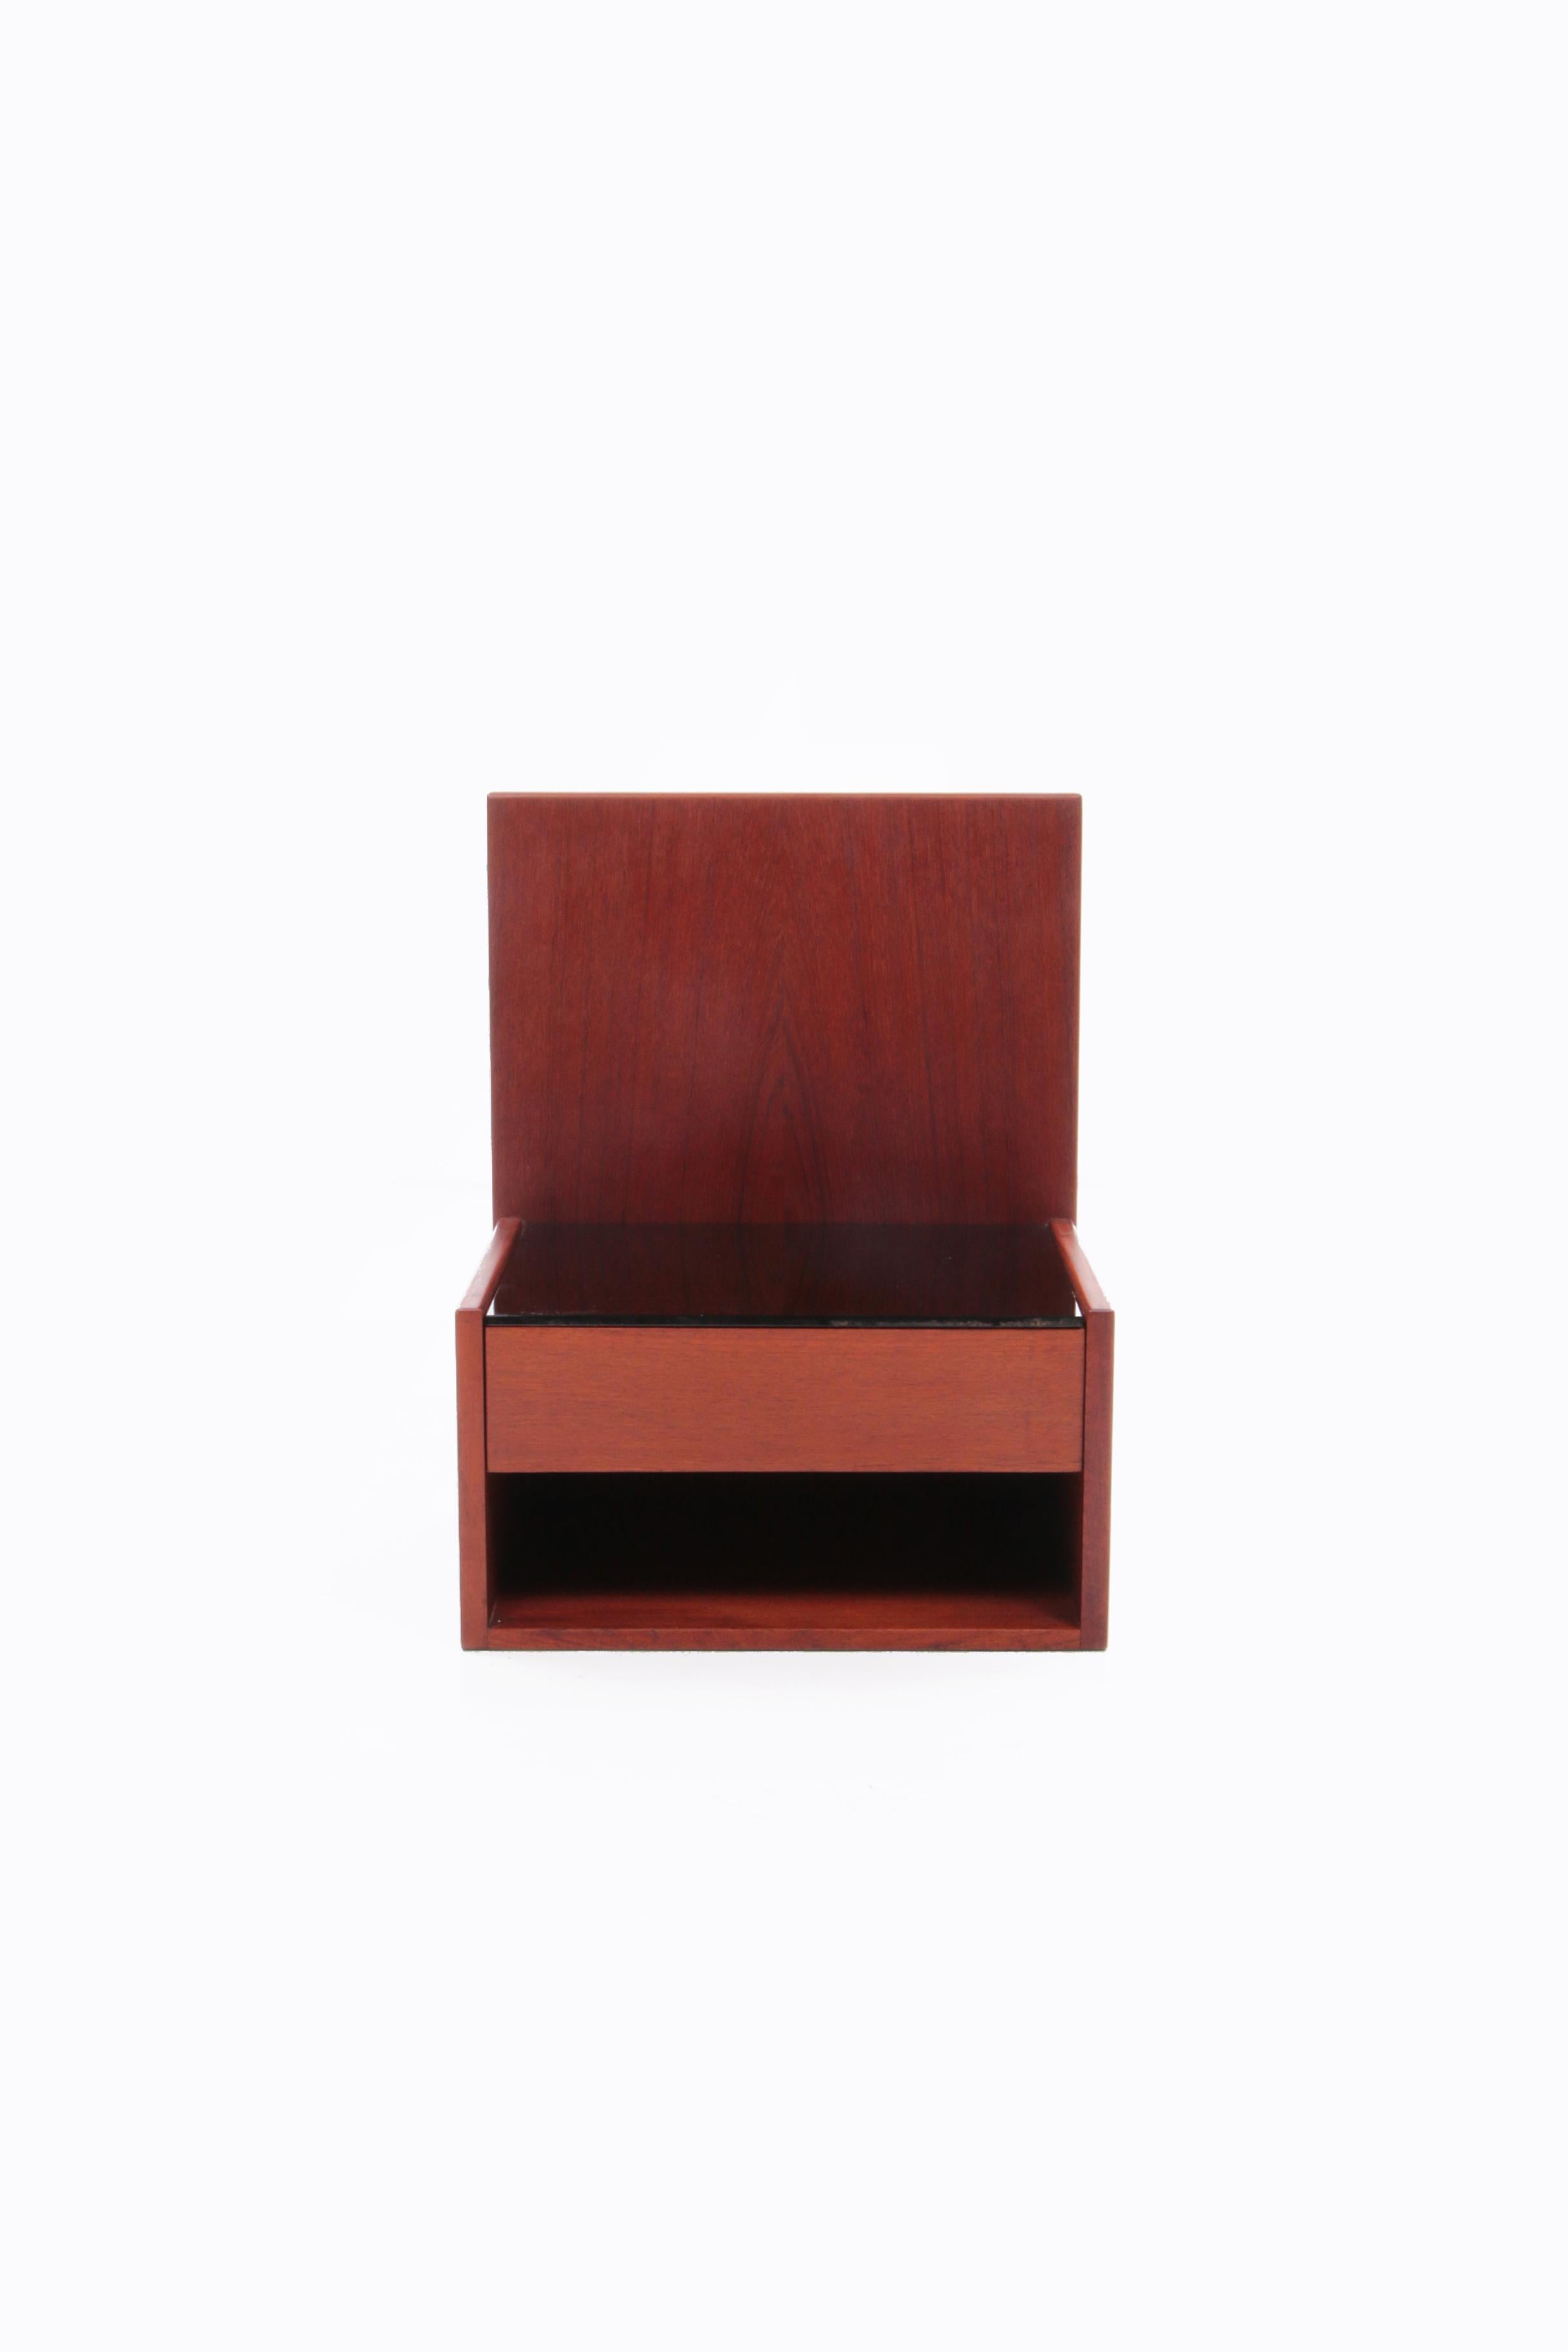 Beautiful bedside table to hang on the back, two attachment points are made. Beautiful teak with a hidden drawer and a smoked glass plate. Another beautiful sleek design by Designer Hans J.Wegner.

Marked on the back, see photo.
Hans J. Wegner

One